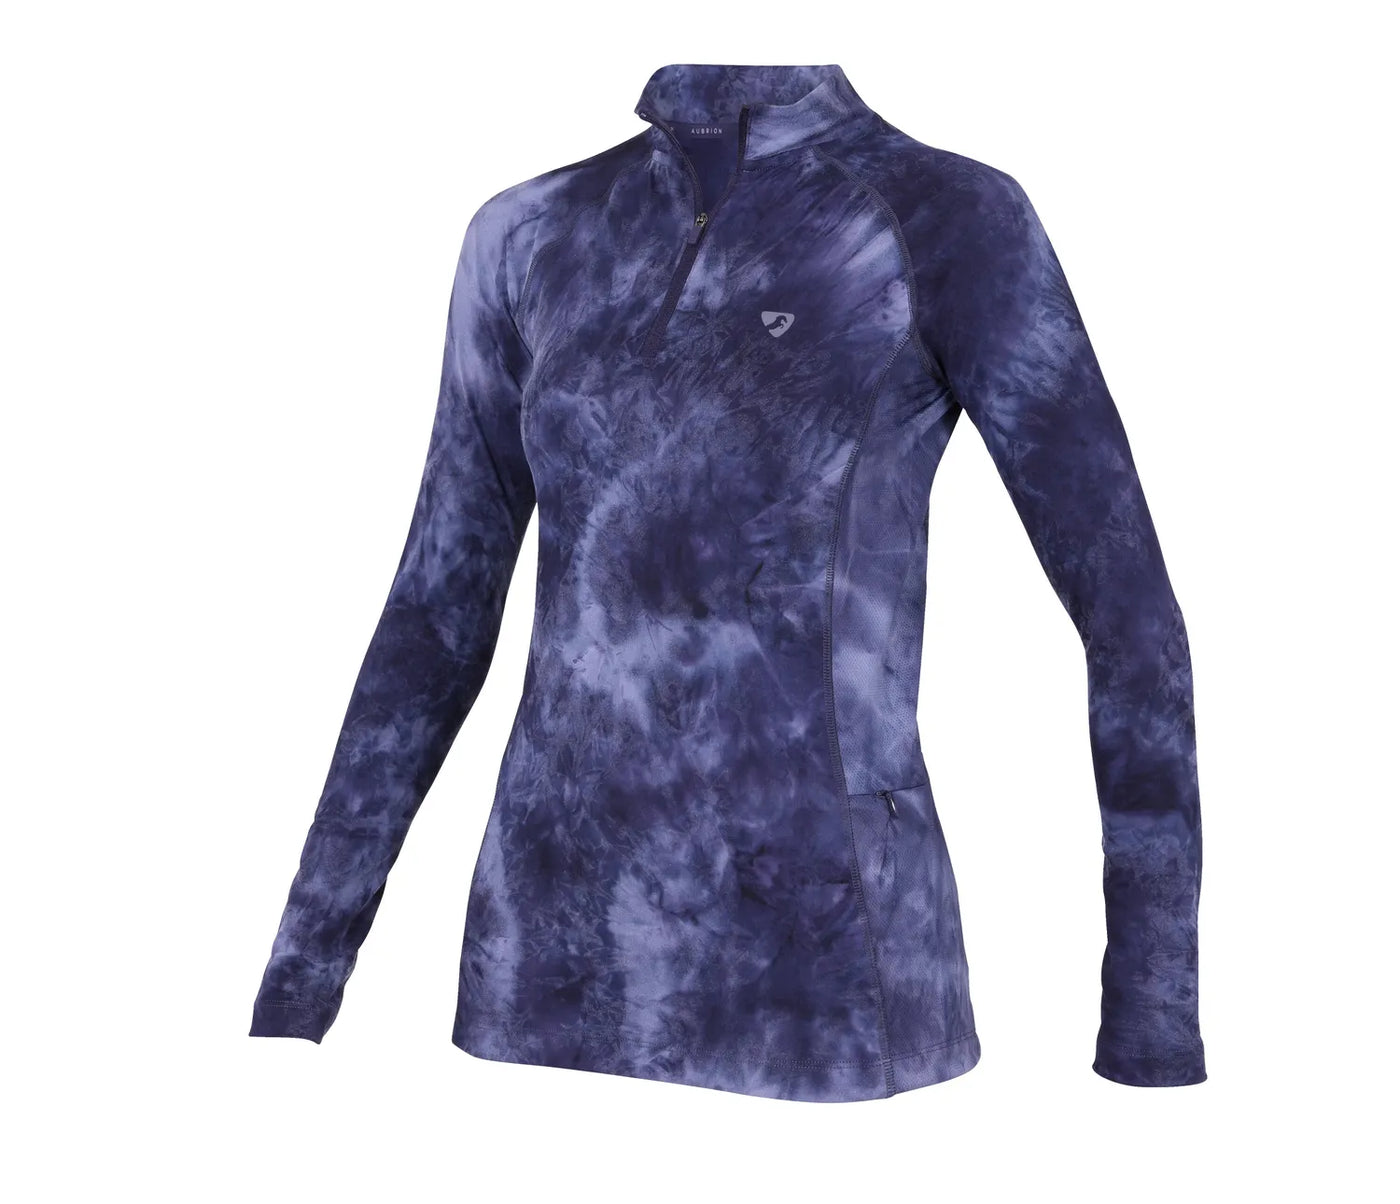 Aubrion Revive Long Sleeve Base Layer - Navy Tie Dye